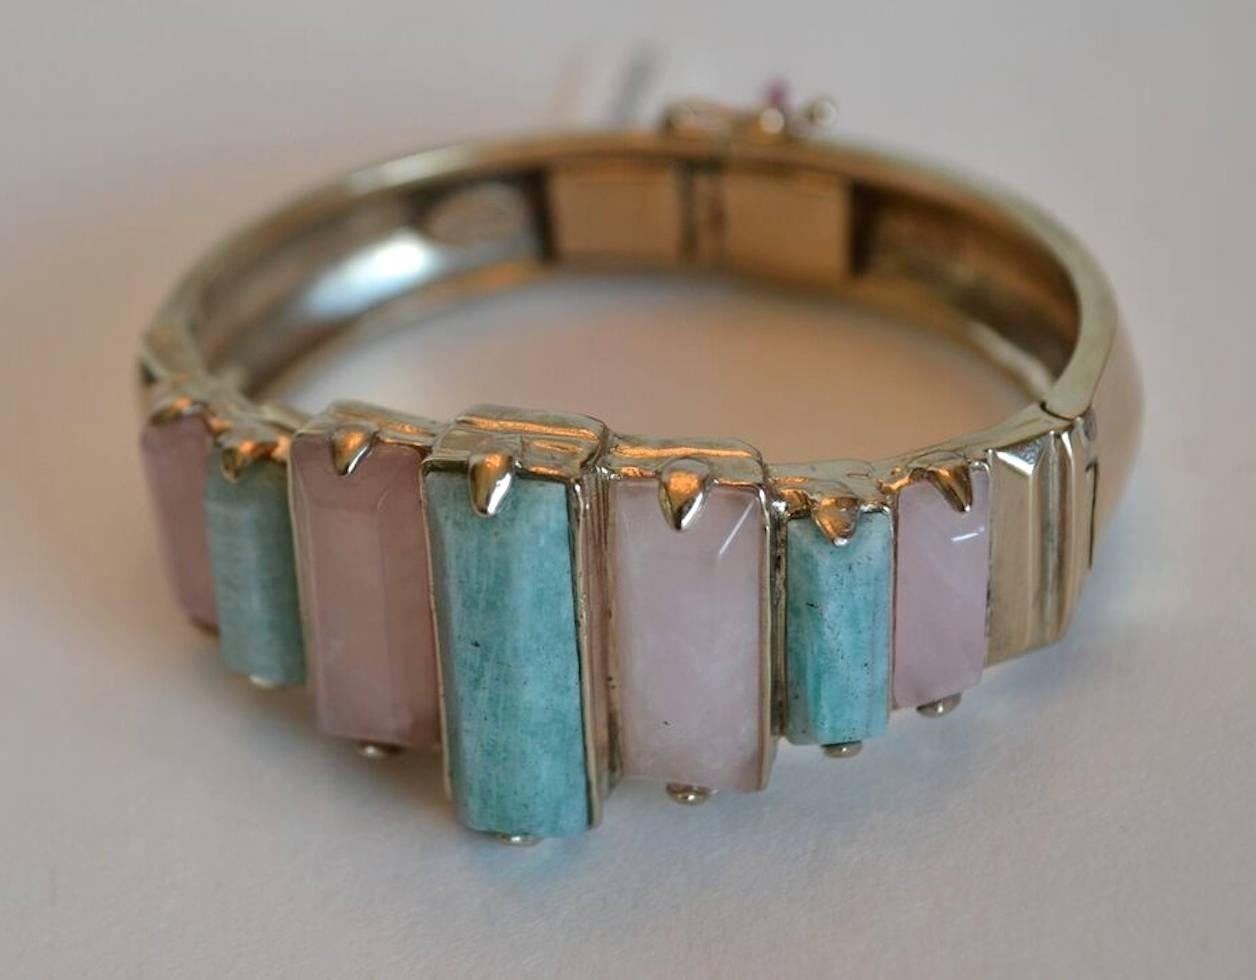 Graduated and alternating pink quartz and amazonite stones make up this gorgeous bracelet from Goossens Paris' Spring 2017 collection. 

Bronze plated with 24 carat pale gold. 